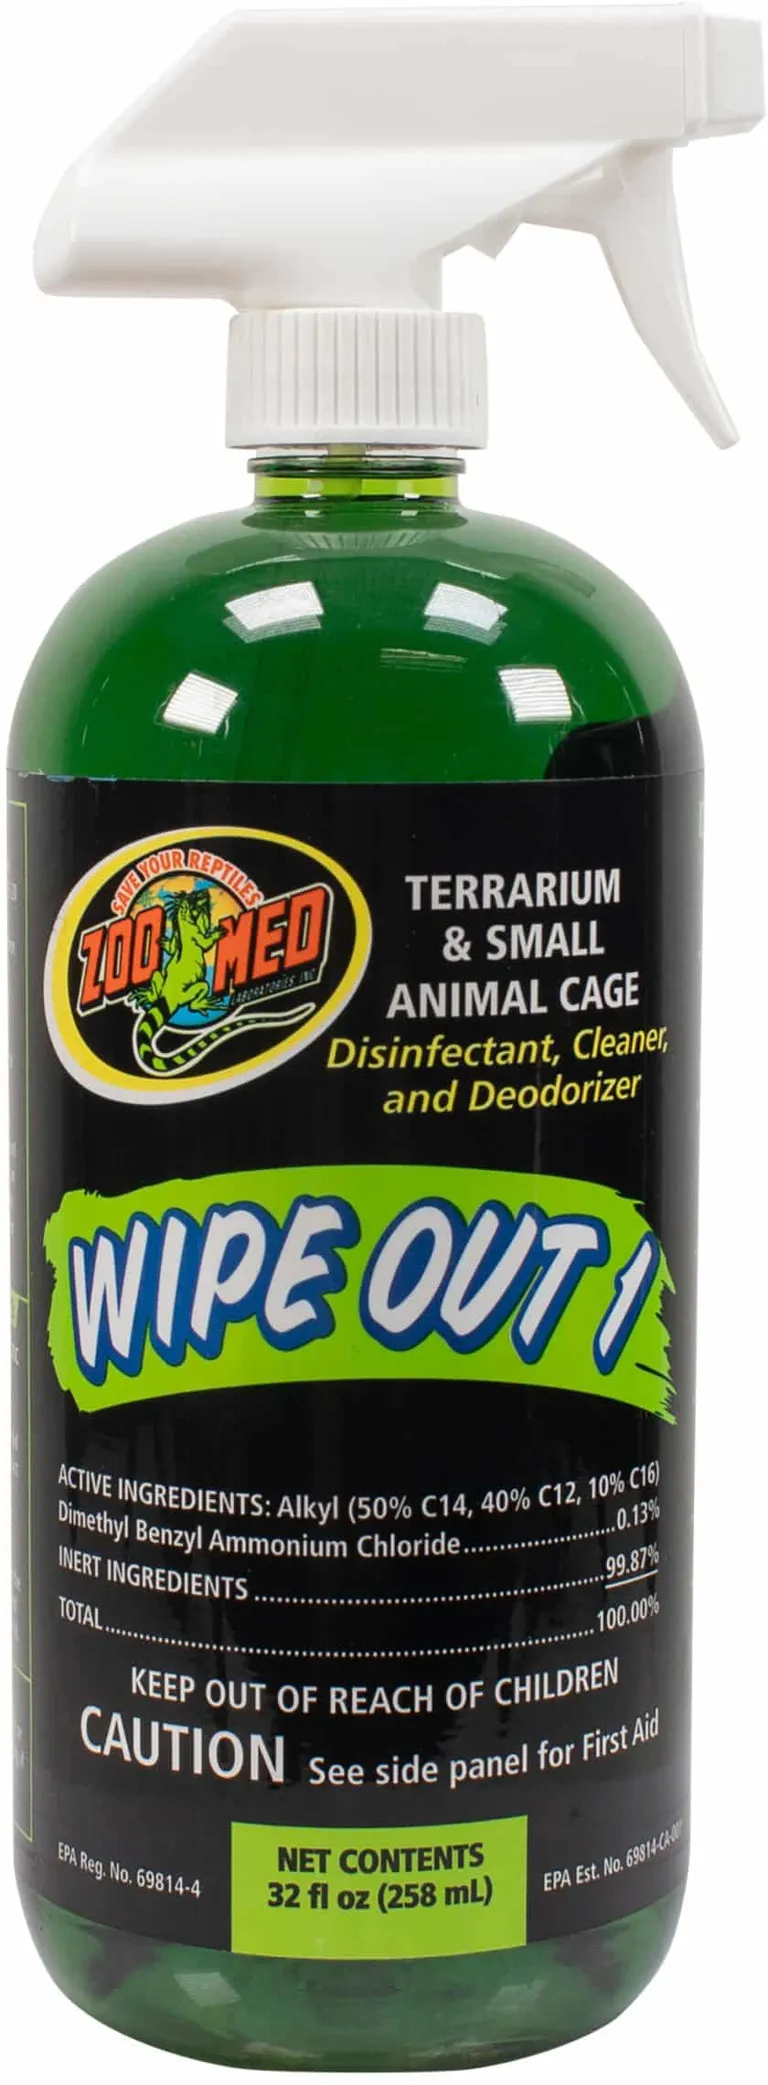 Zoo Med Wipe Out 1 Terrarium Cleaner, Disinfectant and Deodorizer Photo 1